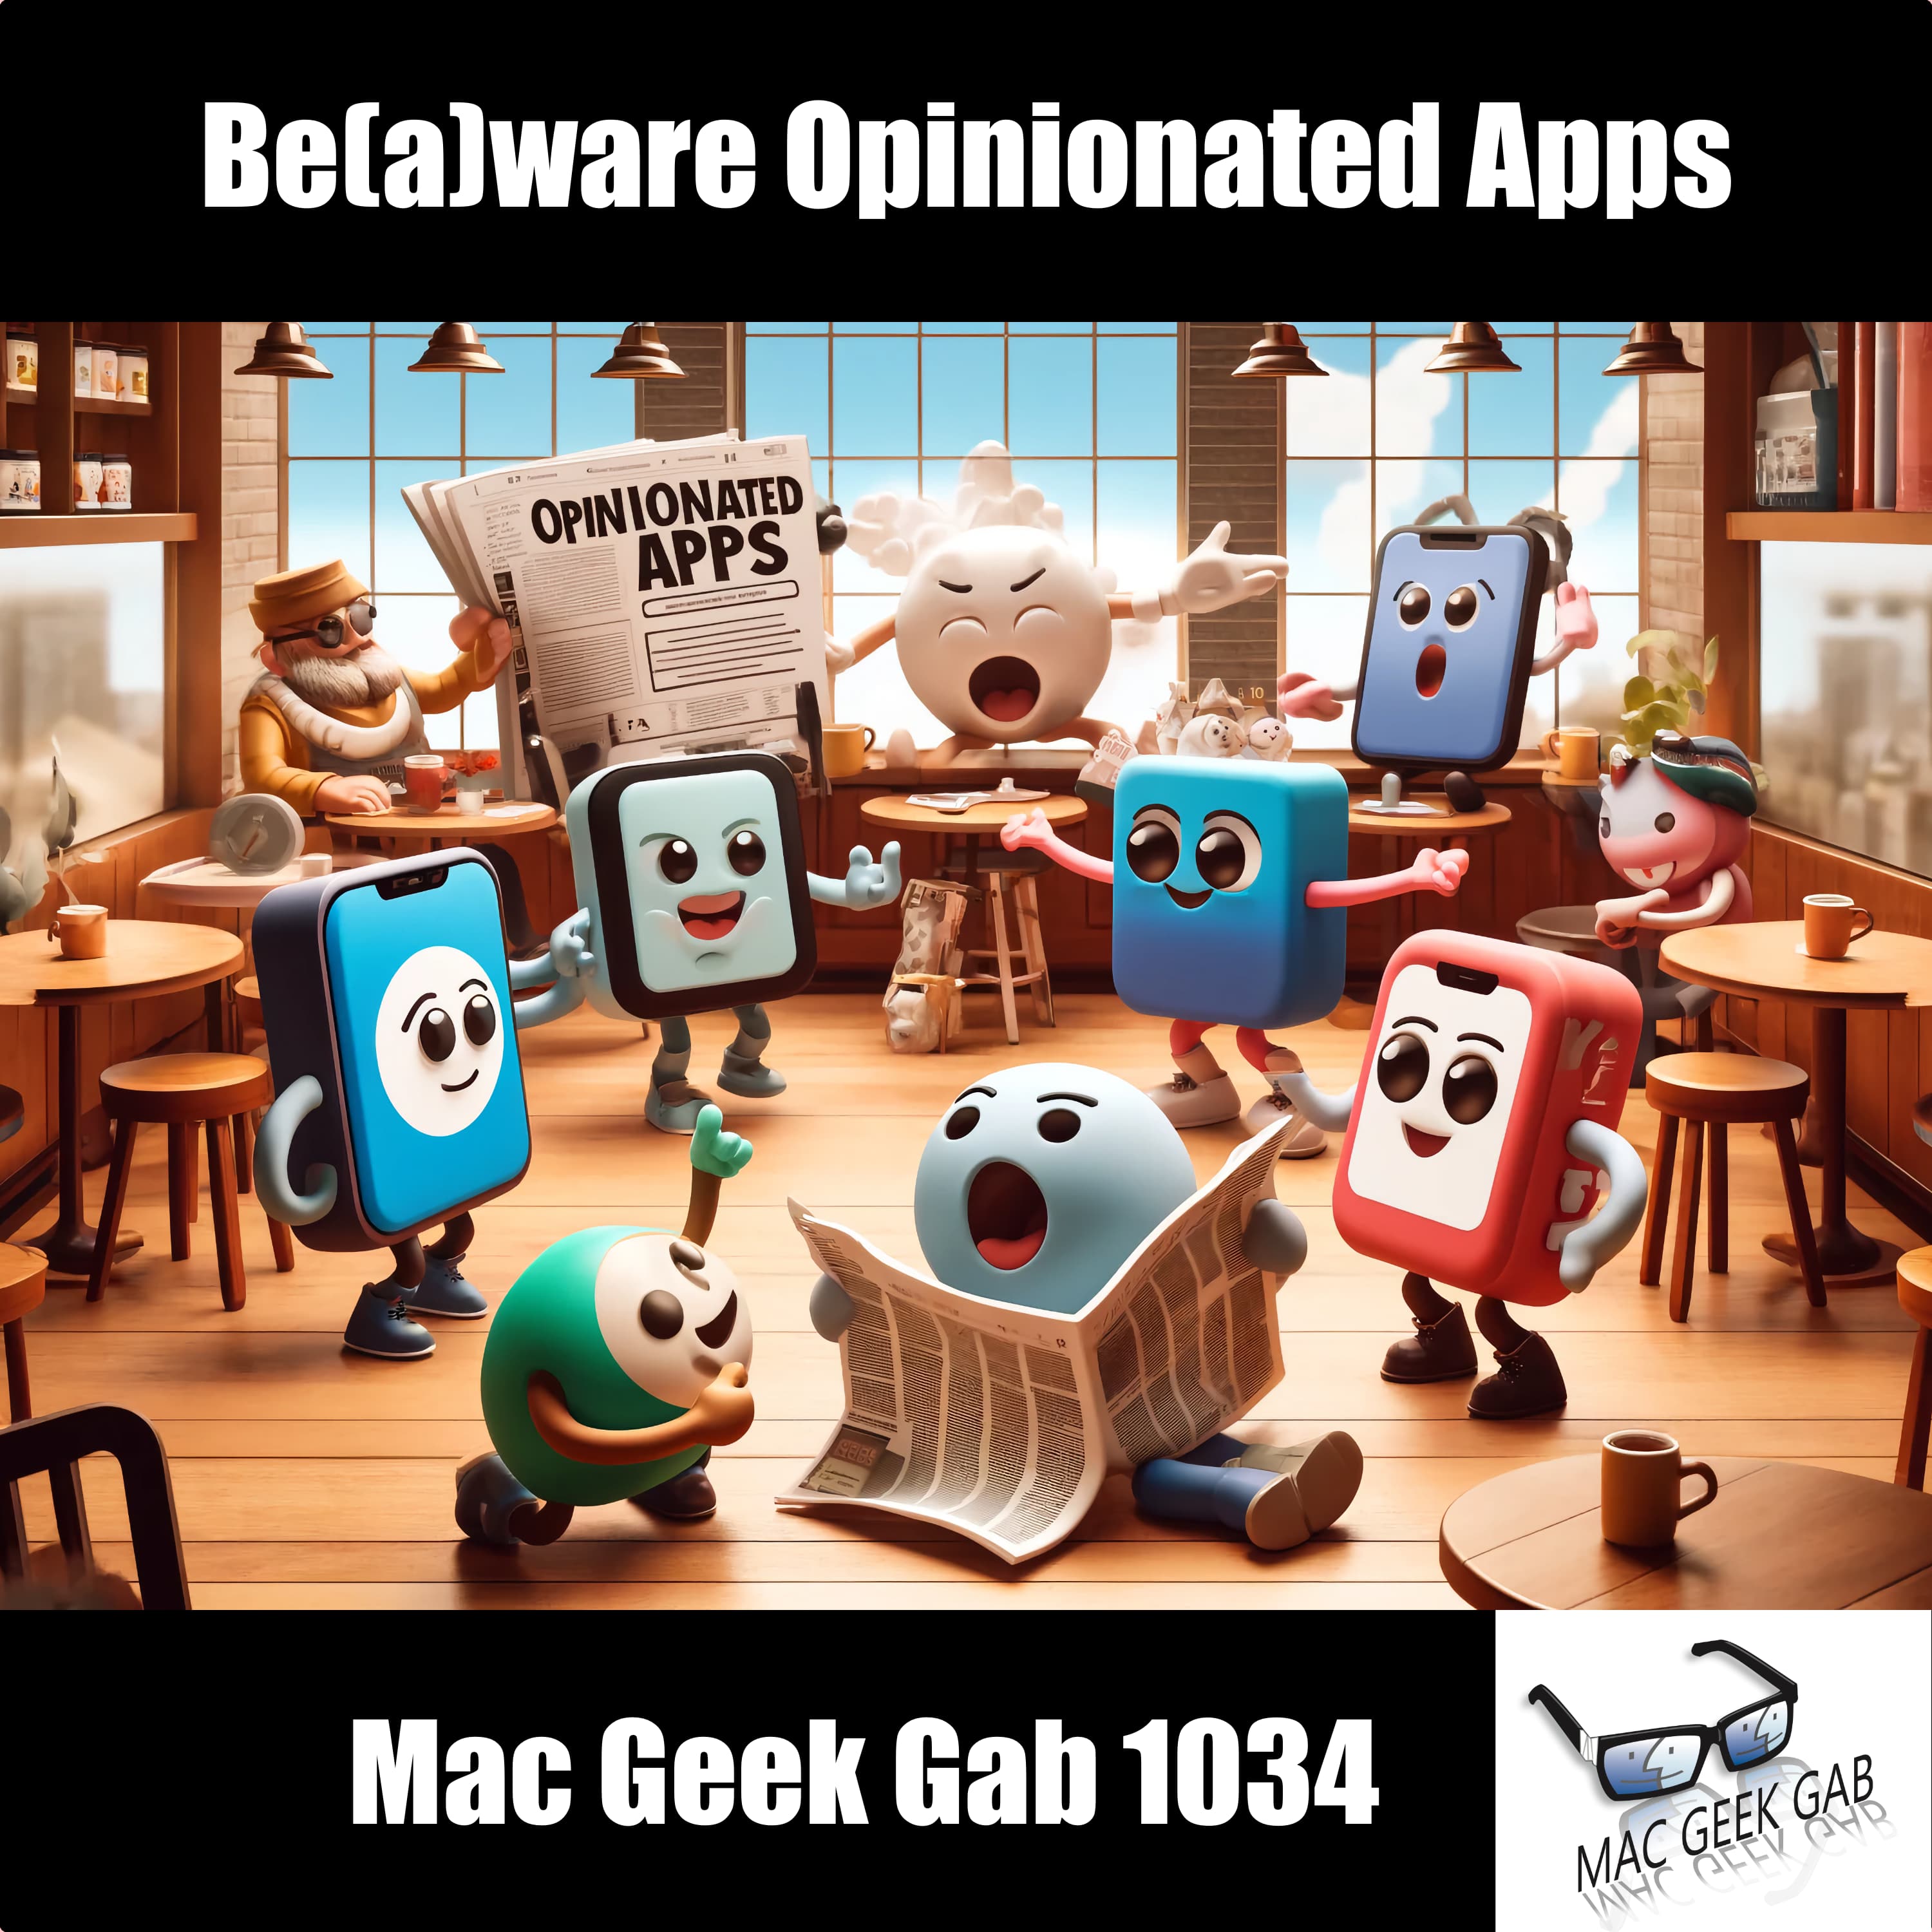 Be(a)ware Opinionated Apps – Mac Geek Gab 1034 episode image